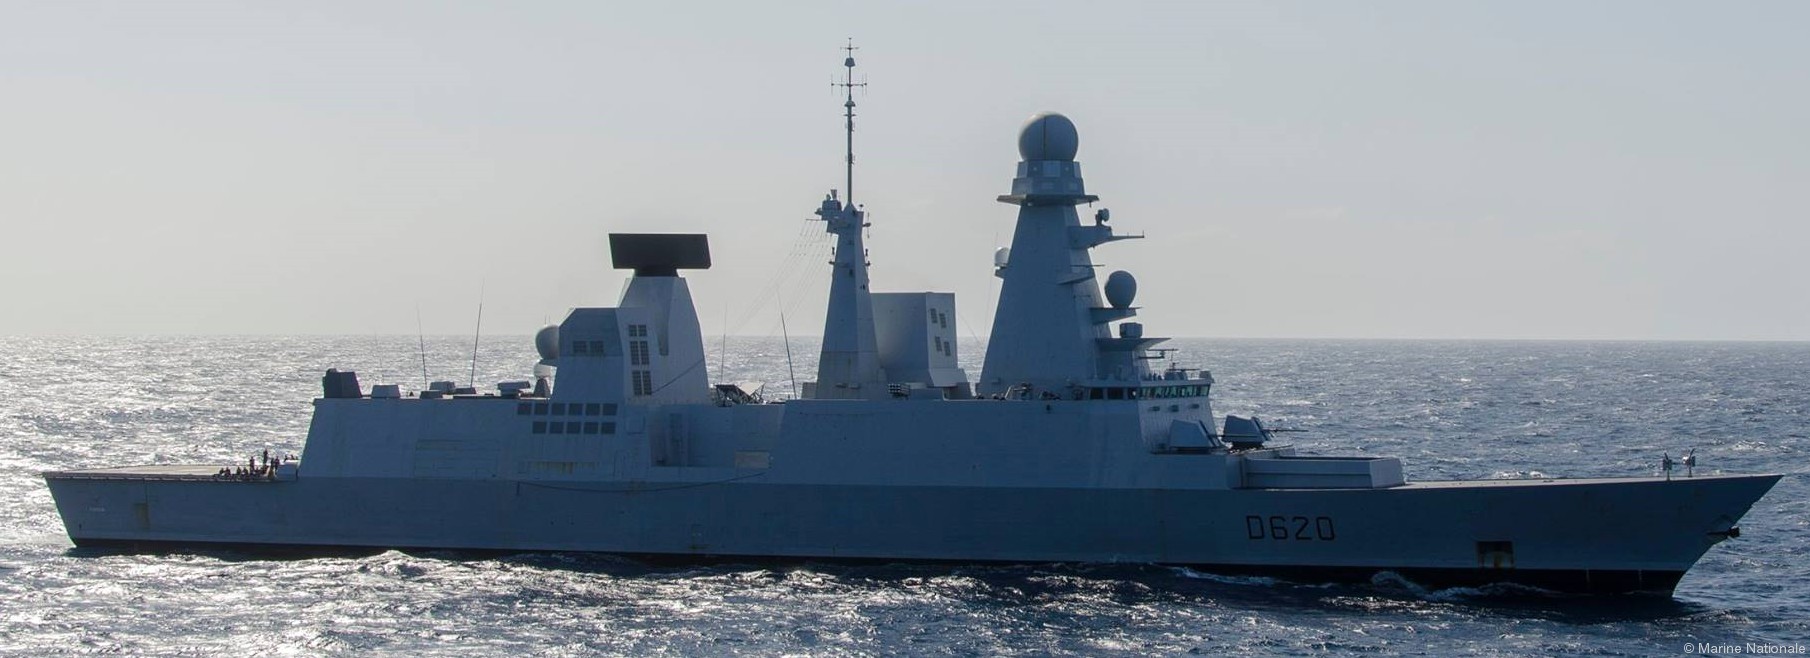 d-620 fs forbin horizon class guided missile frigate fregate anti-air-warfare aaw french navy marine nationale 10